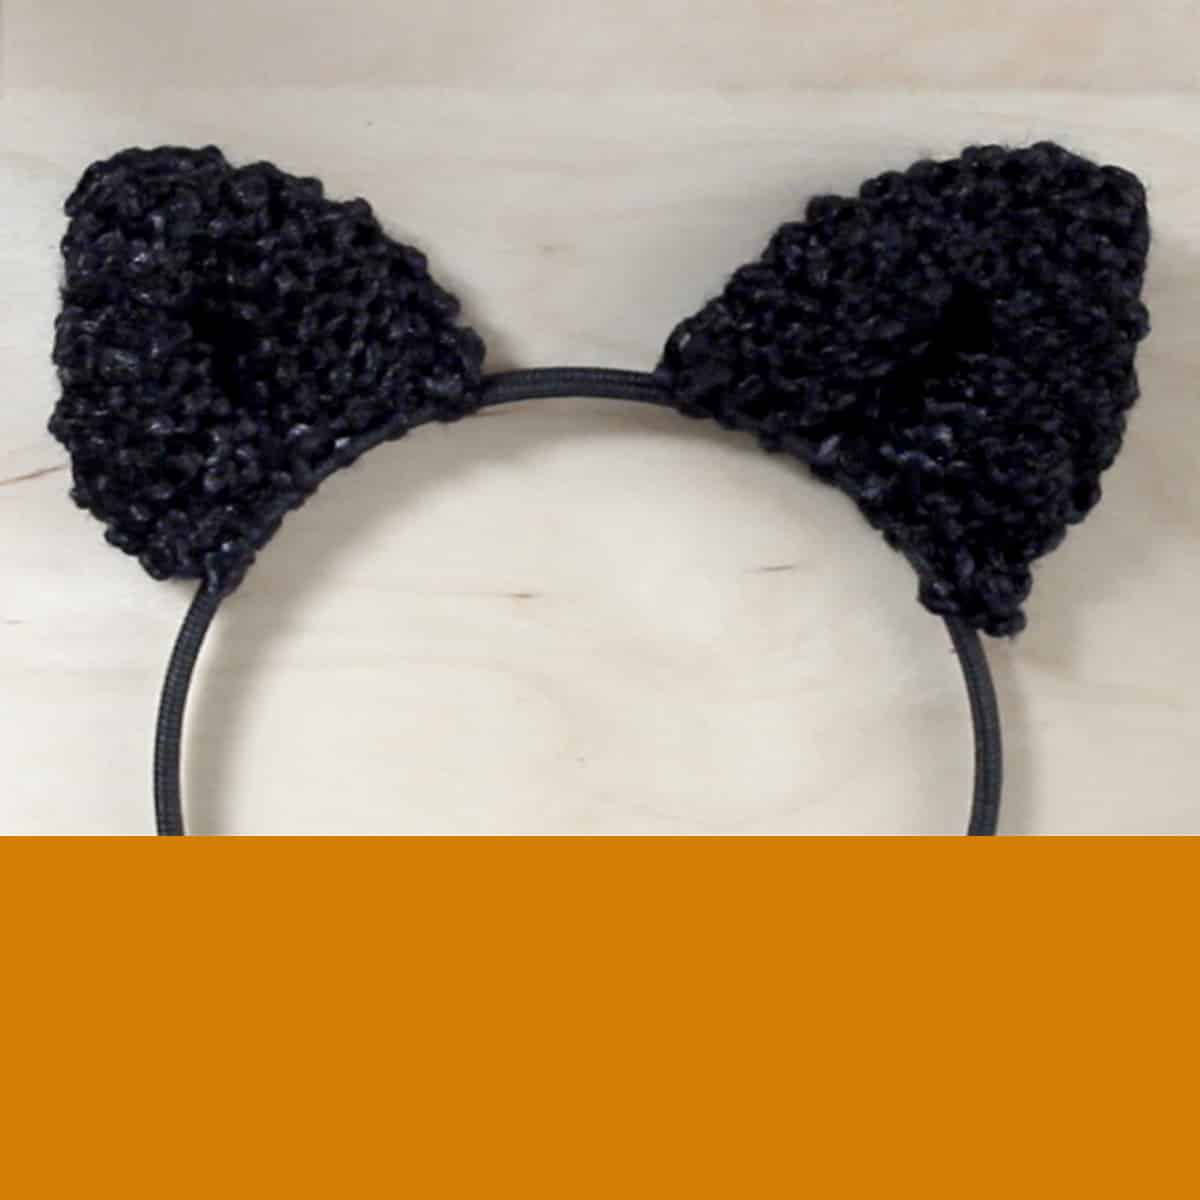 Cat Ears Headphones Cover pattern by Stacy Pamela  Crochet stitches for  beginners, Diy crochet projects, Crochet crafts